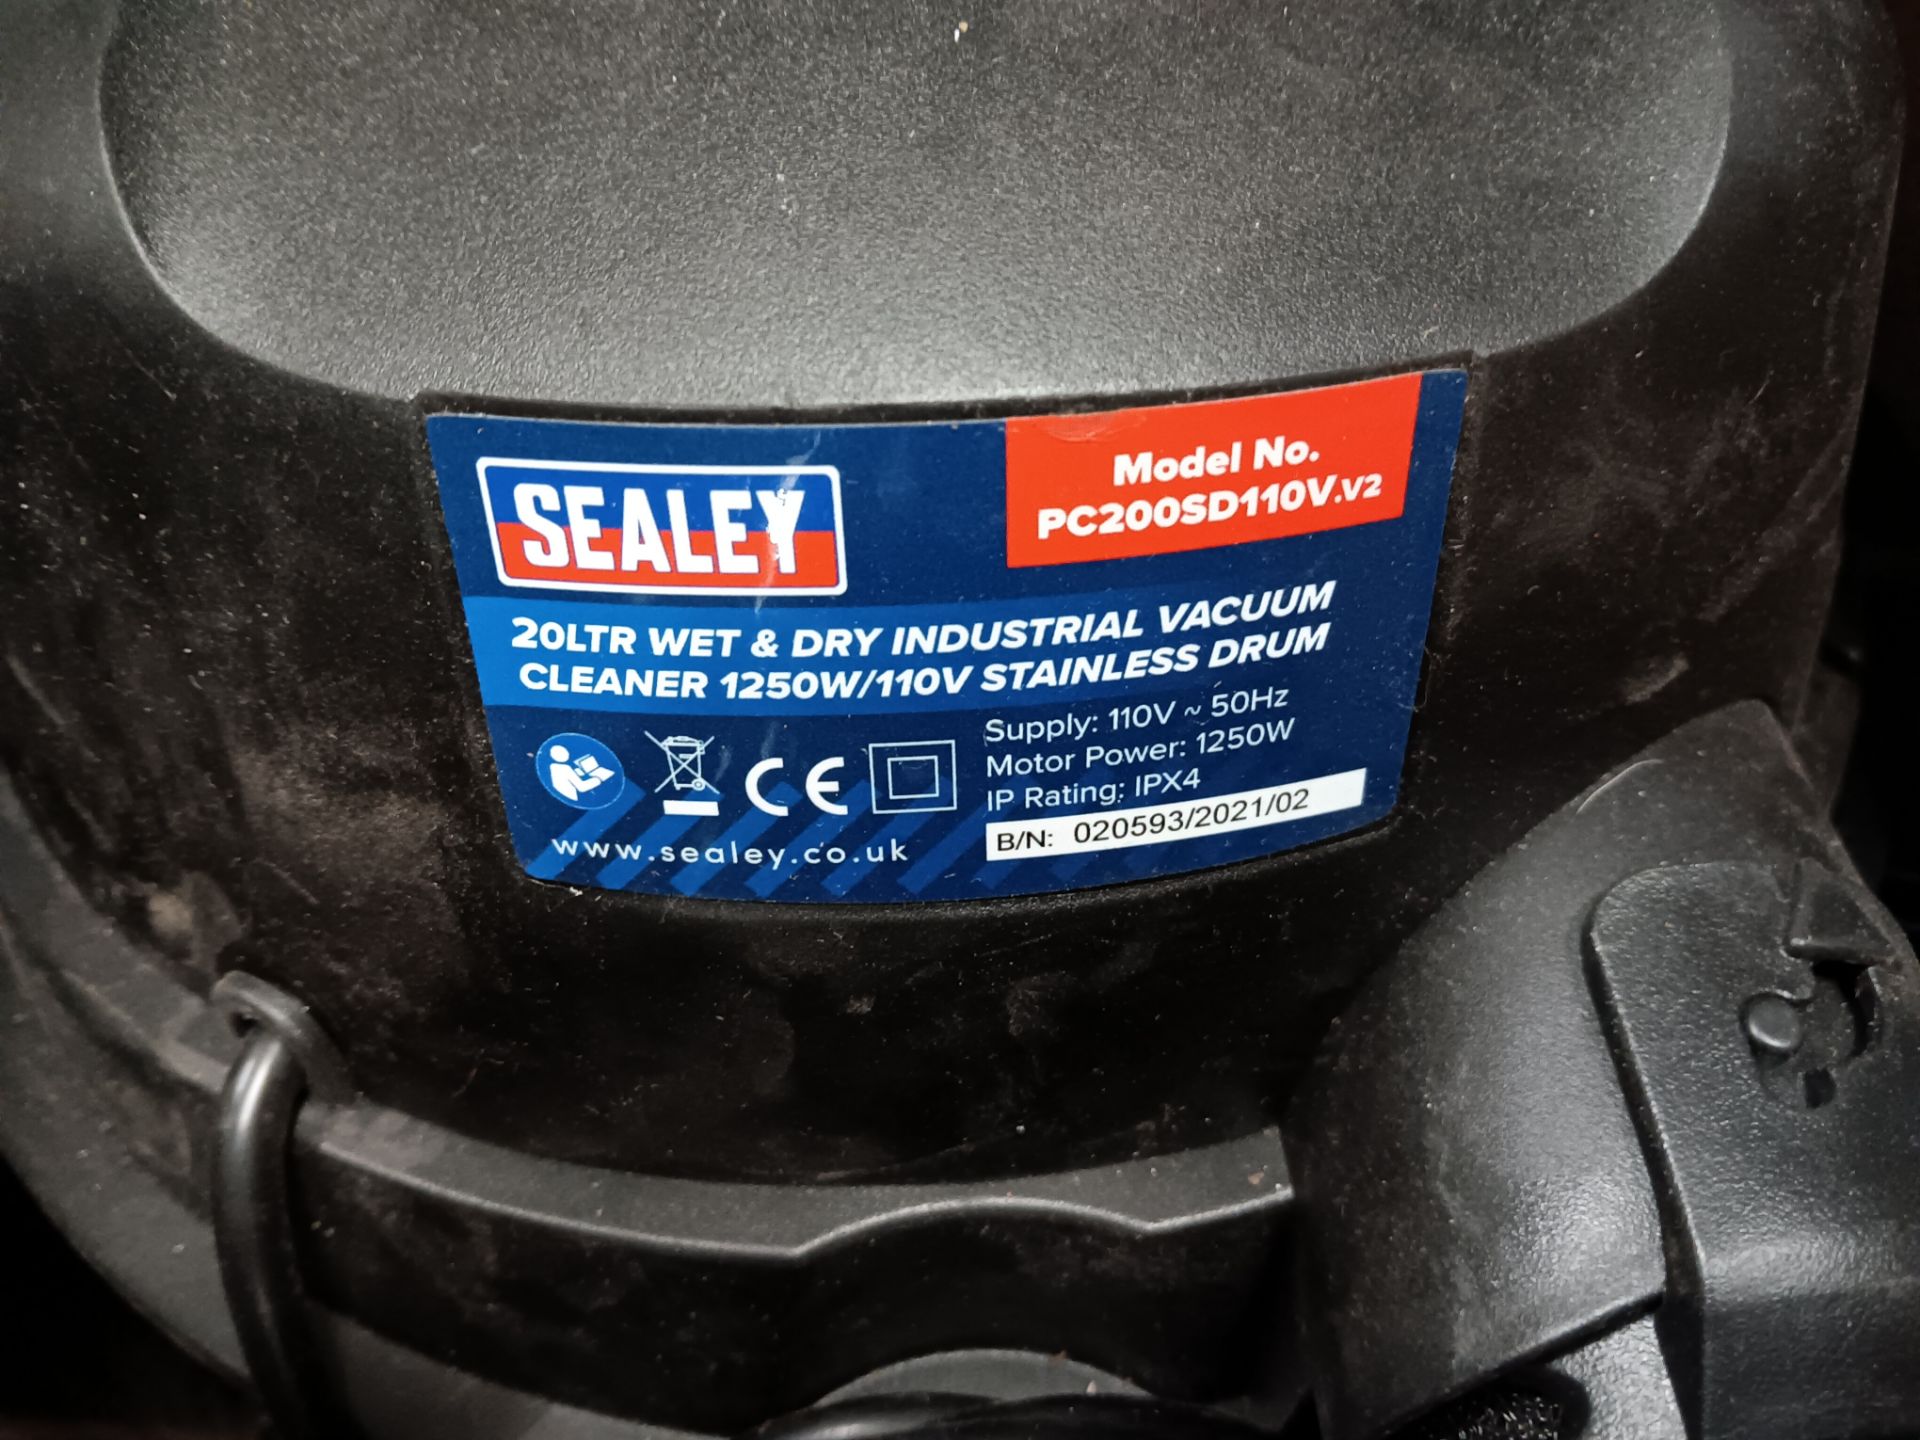 Sealey 20 Ltr wet and dry vacuum cleaner - Image 2 of 3